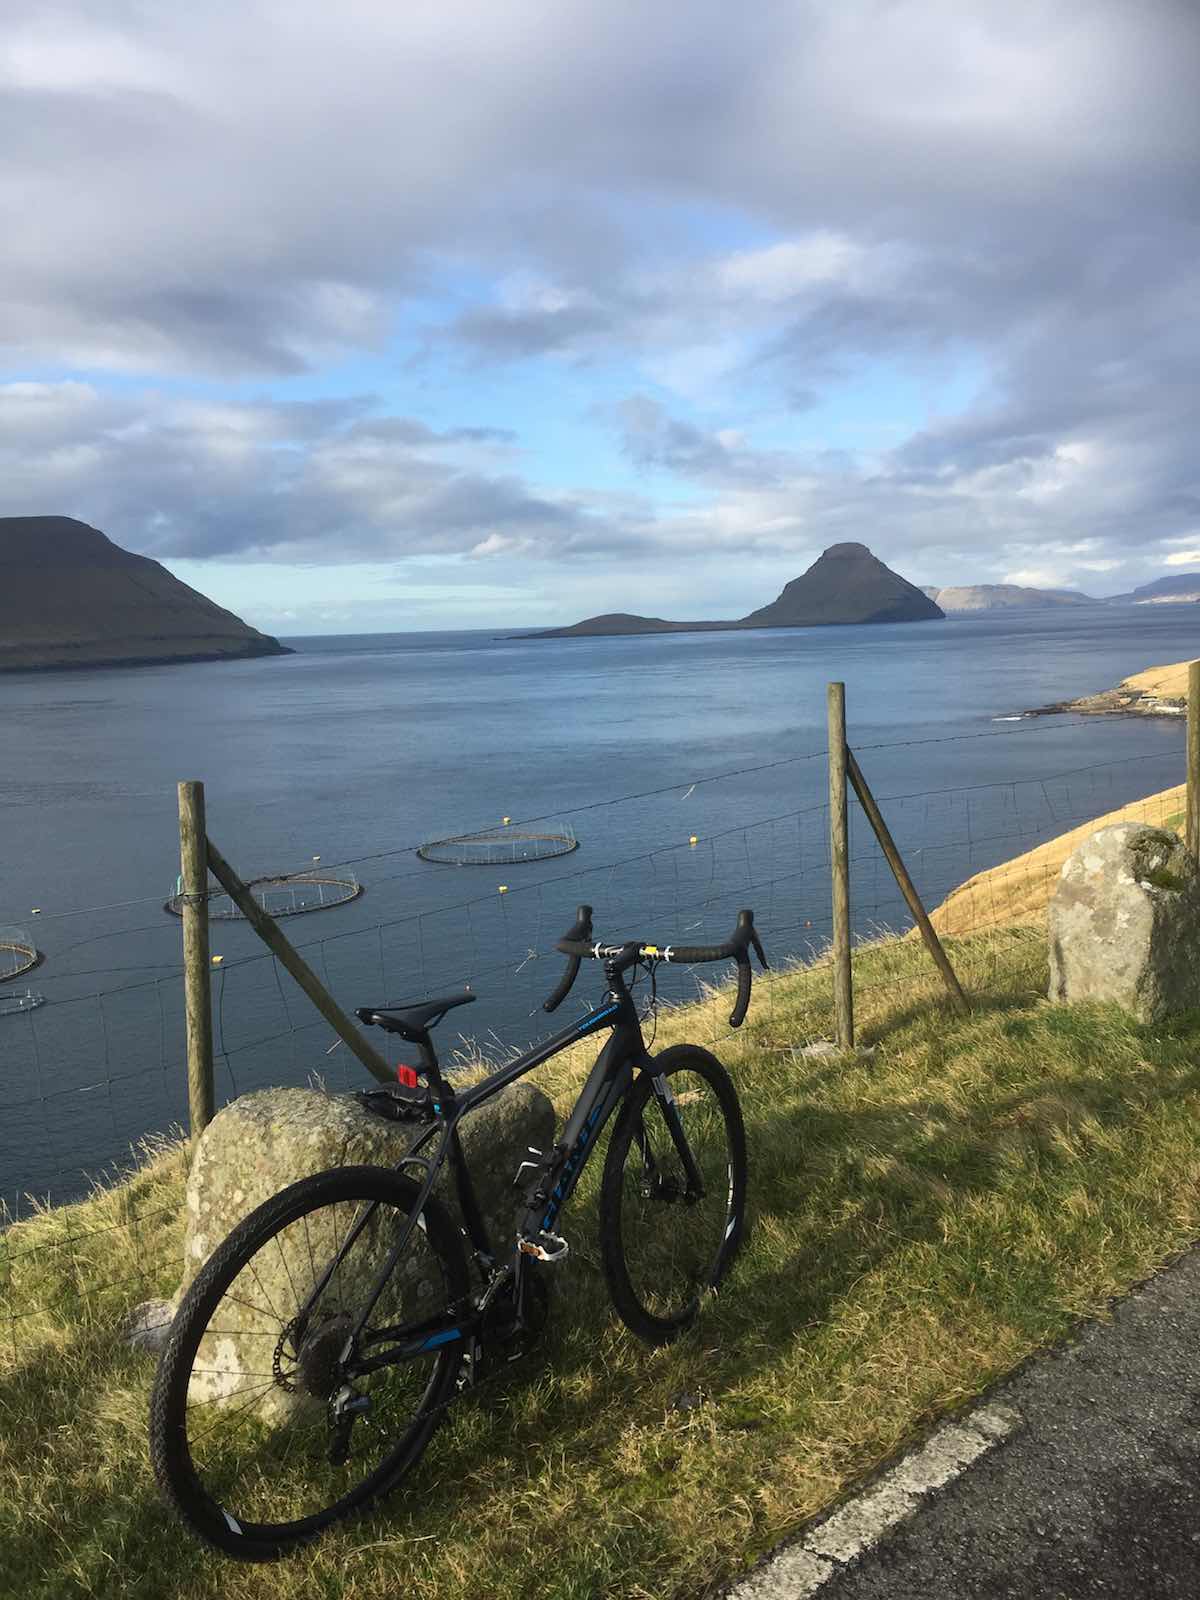 bikerumor pic of the day black Giant Toughroad bicycle looking out over the water on streymoy island of the Faroe Islands.